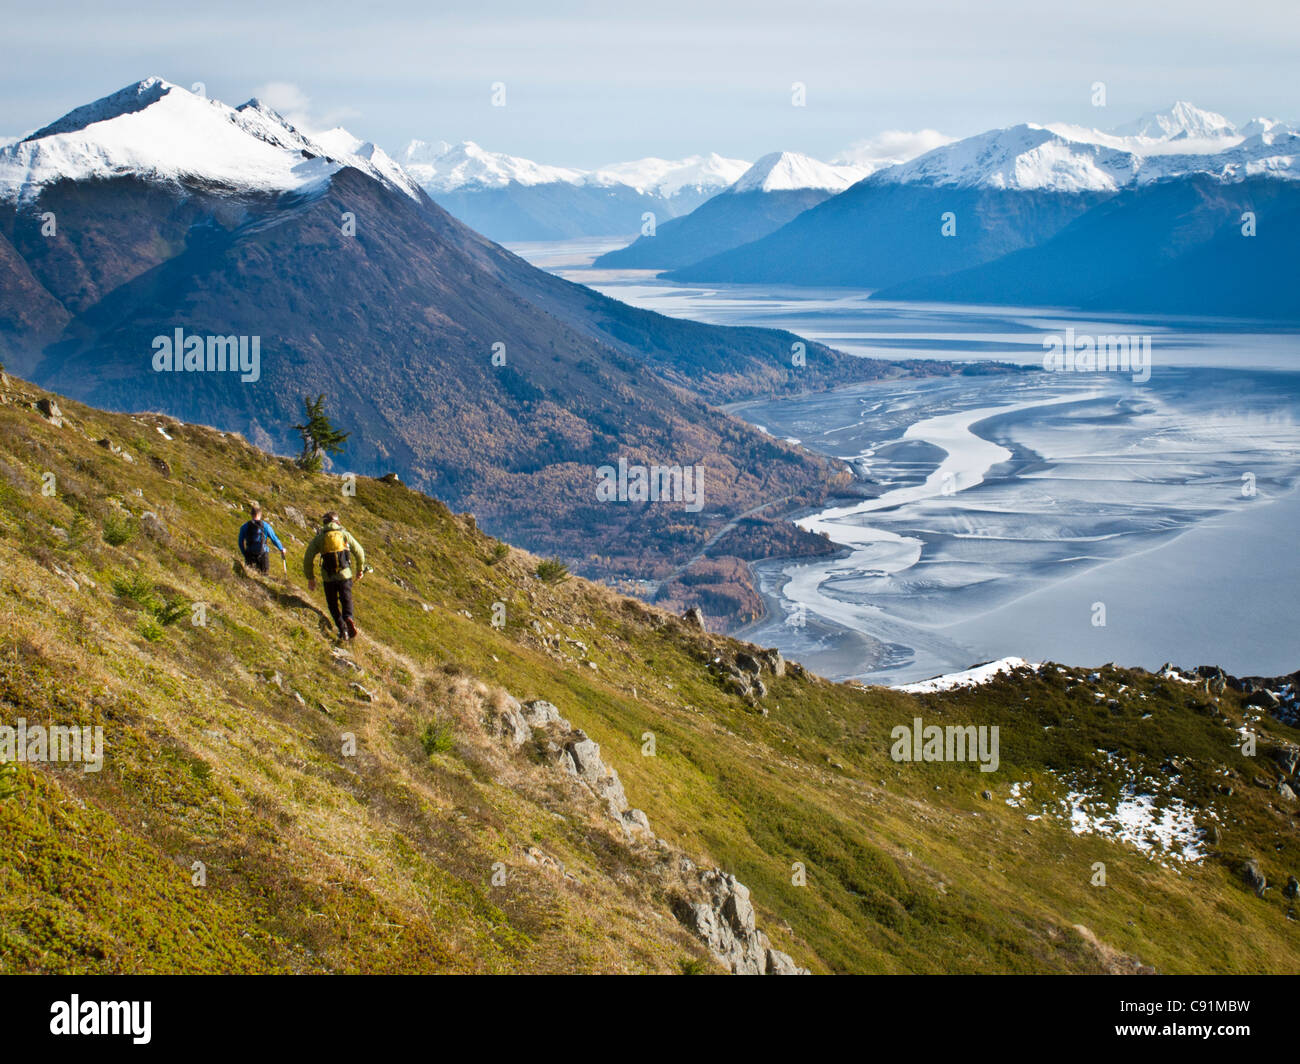 Trail runners traverse tundra on Indian Peak above Indian, Chugach Mountains, Chugach State Park, Fall in Southcentral Alaska Stock Photo